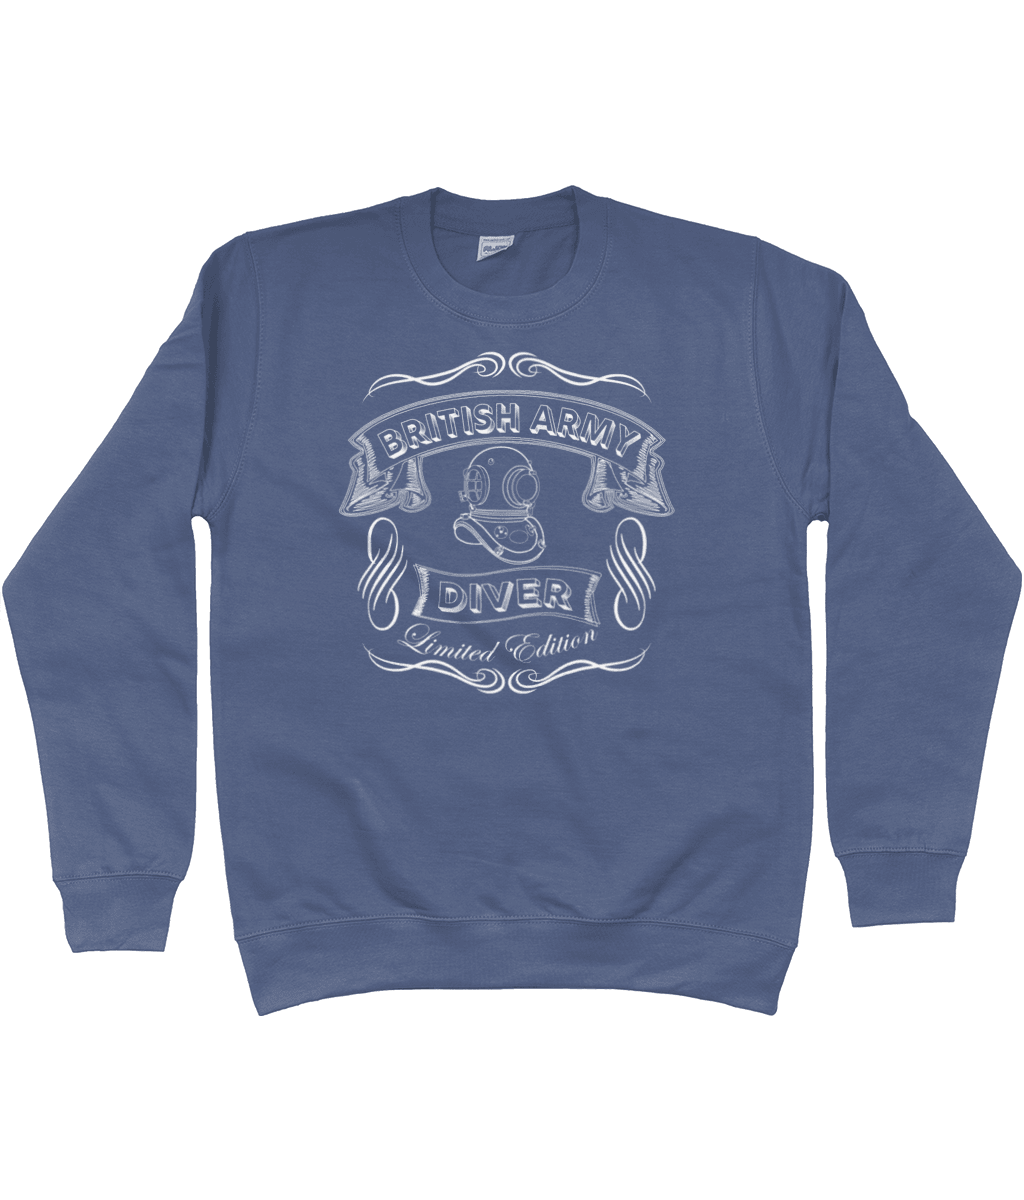 69 - British Army Diver - Sweatshirt (Printed on Front) - Divers Gifts